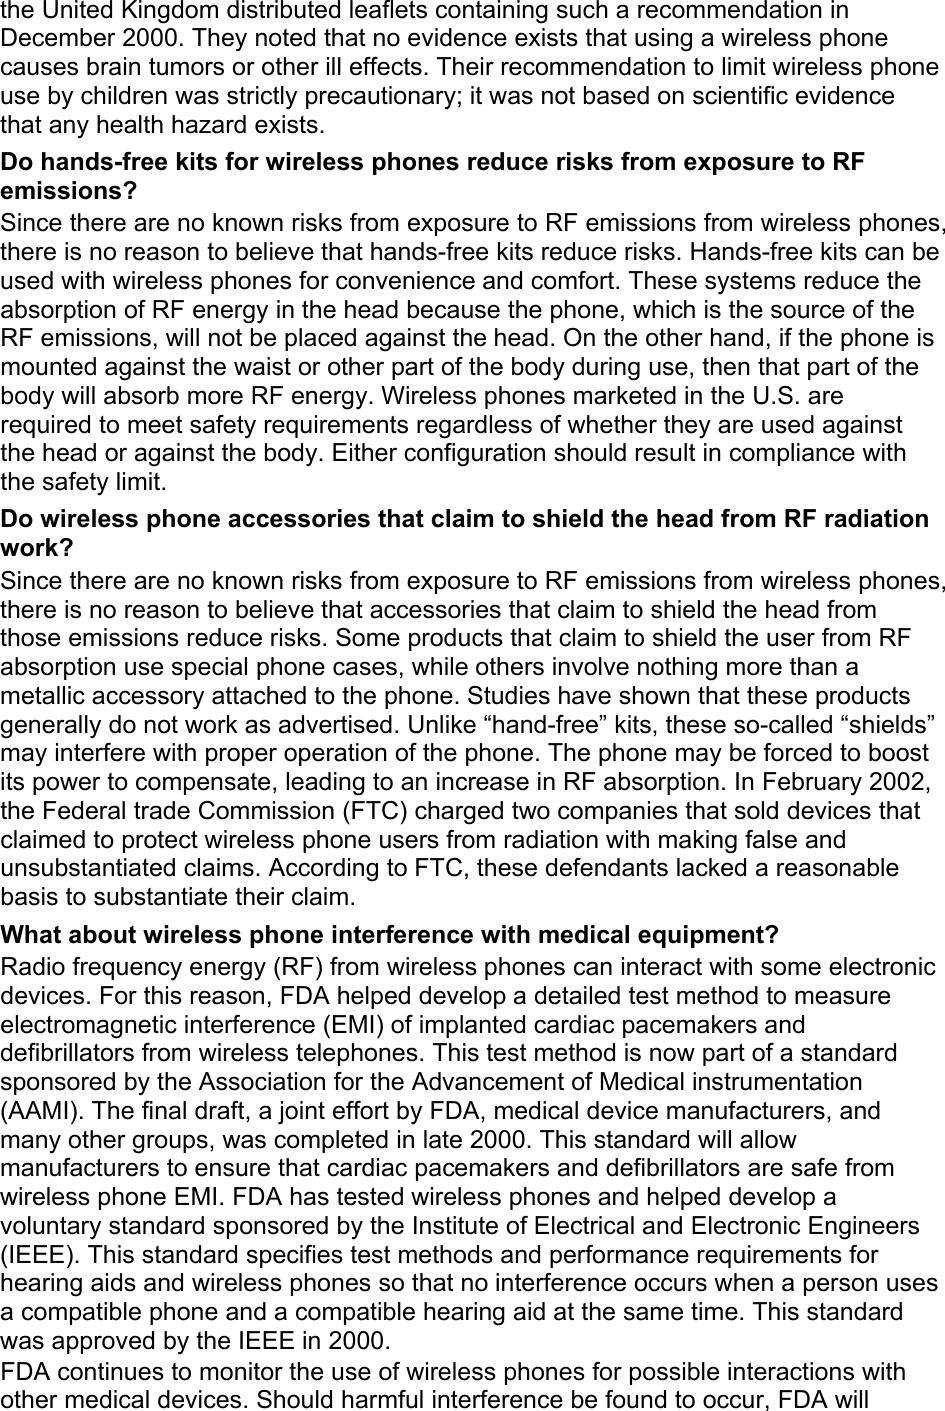 the United Kingdom distributed leaflets containing such a recommendation in December 2000. They noted that no evidence exists that using a wireless phone causes brain tumors or other ill effects. Their recommendation to limit wireless phone use by children was strictly precautionary; it was not based on scientific evidence that any health hazard exists. Do hands-free kits for wireless phones reduce risks from exposure to RF emissions? Since there are no known risks from exposure to RF emissions from wireless phones, there is no reason to believe that hands-free kits reduce risks. Hands-free kits can be used with wireless phones for convenience and comfort. These systems reduce the absorption of RF energy in the head because the phone, which is the source of the RF emissions, will not be placed against the head. On the other hand, if the phone is mounted against the waist or other part of the body during use, then that part of the body will absorb more RF energy. Wireless phones marketed in the U.S. are required to meet safety requirements regardless of whether they are used against the head or against the body. Either configuration should result in compliance with the safety limit.Do wireless phone accessories that claim to shield the head from RF radiation work? Since there are no known risks from exposure to RF emissions from wireless phones, there is no reason to believe that accessories that claim to shield the head from those emissions reduce risks. Some products that claim to shield the user from RF absorption use special phone cases, while others involve nothing more than a metallic accessory attached to the phone. Studies have shown that these products generally do not work as advertised. Unlike “hand-free” kits, these so-called “shields” may interfere with proper operation of the phone. The phone may be forced to boost its power to compensate, leading to an increase in RF absorption. In February 2002, the Federal trade Commission (FTC) charged two companies that sold devices that claimed to protect wireless phone users from radiation with making false and unsubstantiated claims. According to FTC, these defendants lacked a reasonable basis to substantiate their claim.What about wireless phone interference with medical equipment? Radio frequency energy (RF) from wireless phones can interact with some electronic devices. For this reason, FDA helped develop a detailed test method to measure electromagnetic interference (EMI) of implanted cardiac pacemakers and defibrillators from wireless telephones. This test method is now part of a standard sponsored by the Association for the Advancement of Medical instrumentation (AAMI). The final draft, a joint effort by FDA, medical device manufacturers, and many other groups, was completed in late 2000. This standard will allow manufacturers to ensure that cardiac pacemakers and defibrillators are safe from wireless phone EMI. FDA has tested wireless phones and helped develop a voluntary standard sponsored by the Institute of Electrical and Electronic Engineers (IEEE). This standard specifies test methods and performance requirements for hearing aids and wireless phones so that no interference occurs when a person uses a compatible phone and a compatible hearing aid at the same time. This standard was approved by the IEEE in 2000.FDA continues to monitor the use of wireless phones for possible interactions with other medical devices. Should harmful interference be found to occur, FDA will 